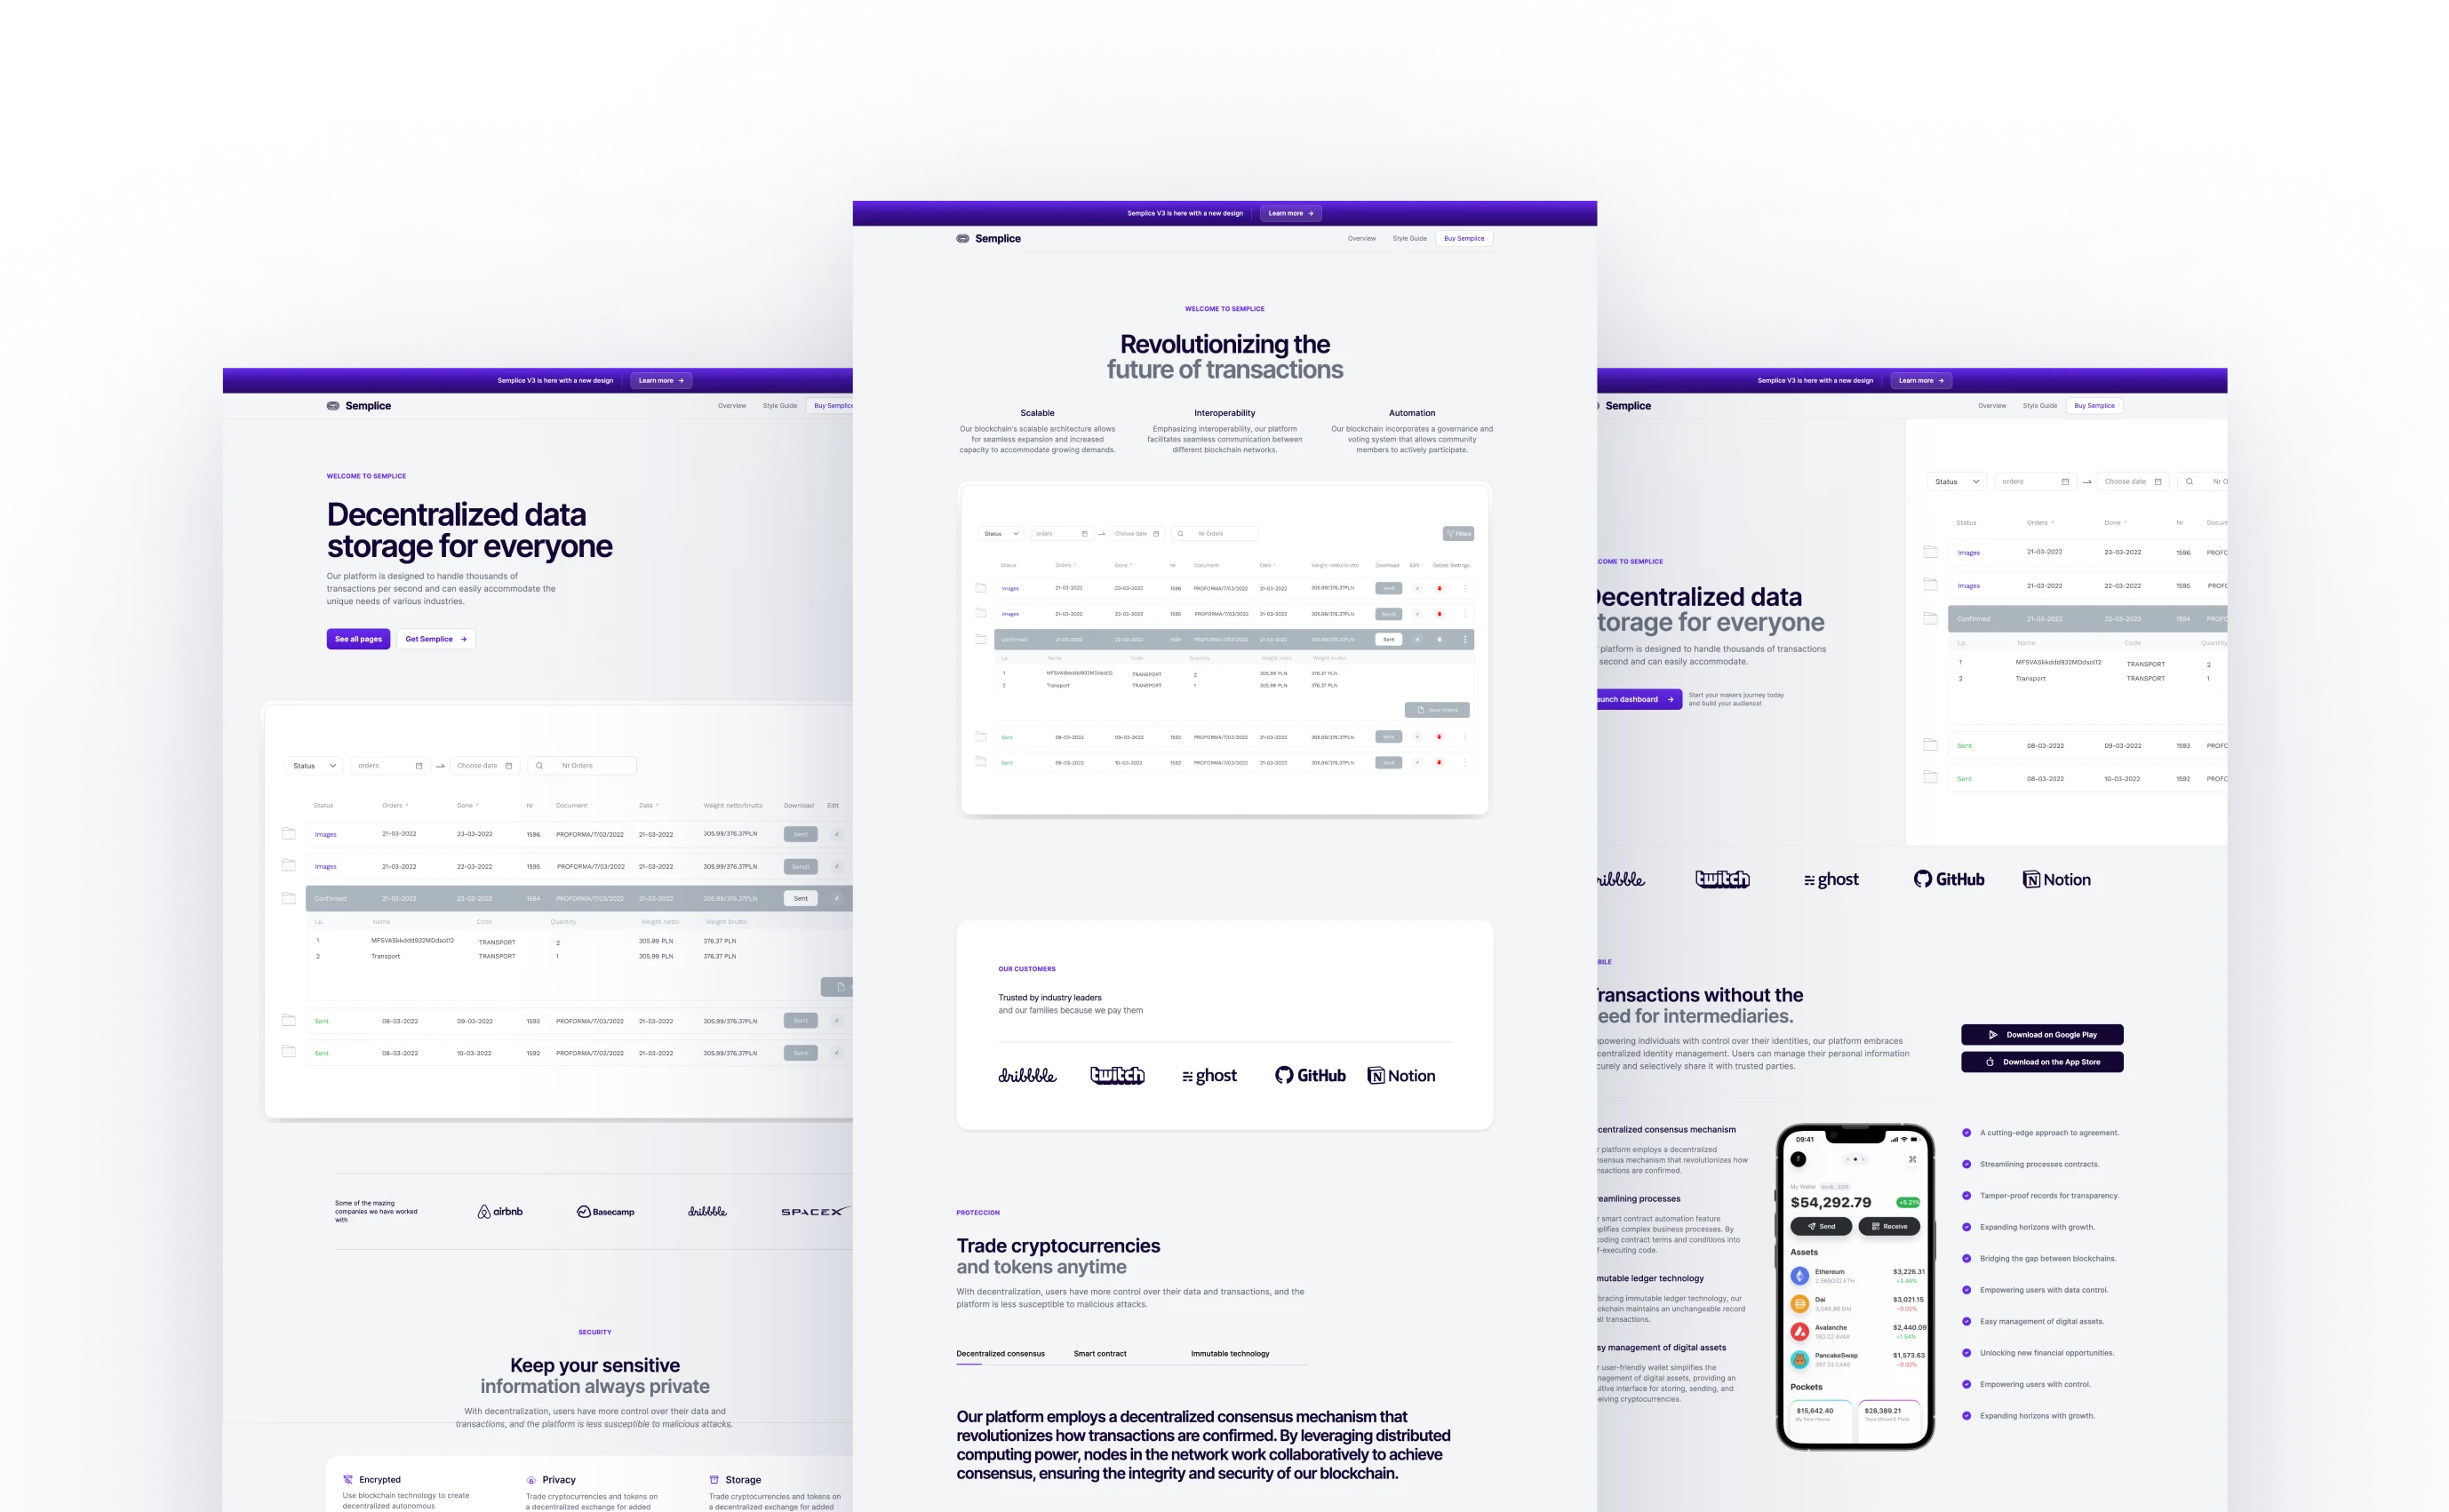 Semplice theme layout for a blockchain-based platform, with a clean and modern design in white and purple. It features sections for decentralized data storage, cryptocurrency trading, and secure transactions, alongside mobile app views for trading and wallet management.